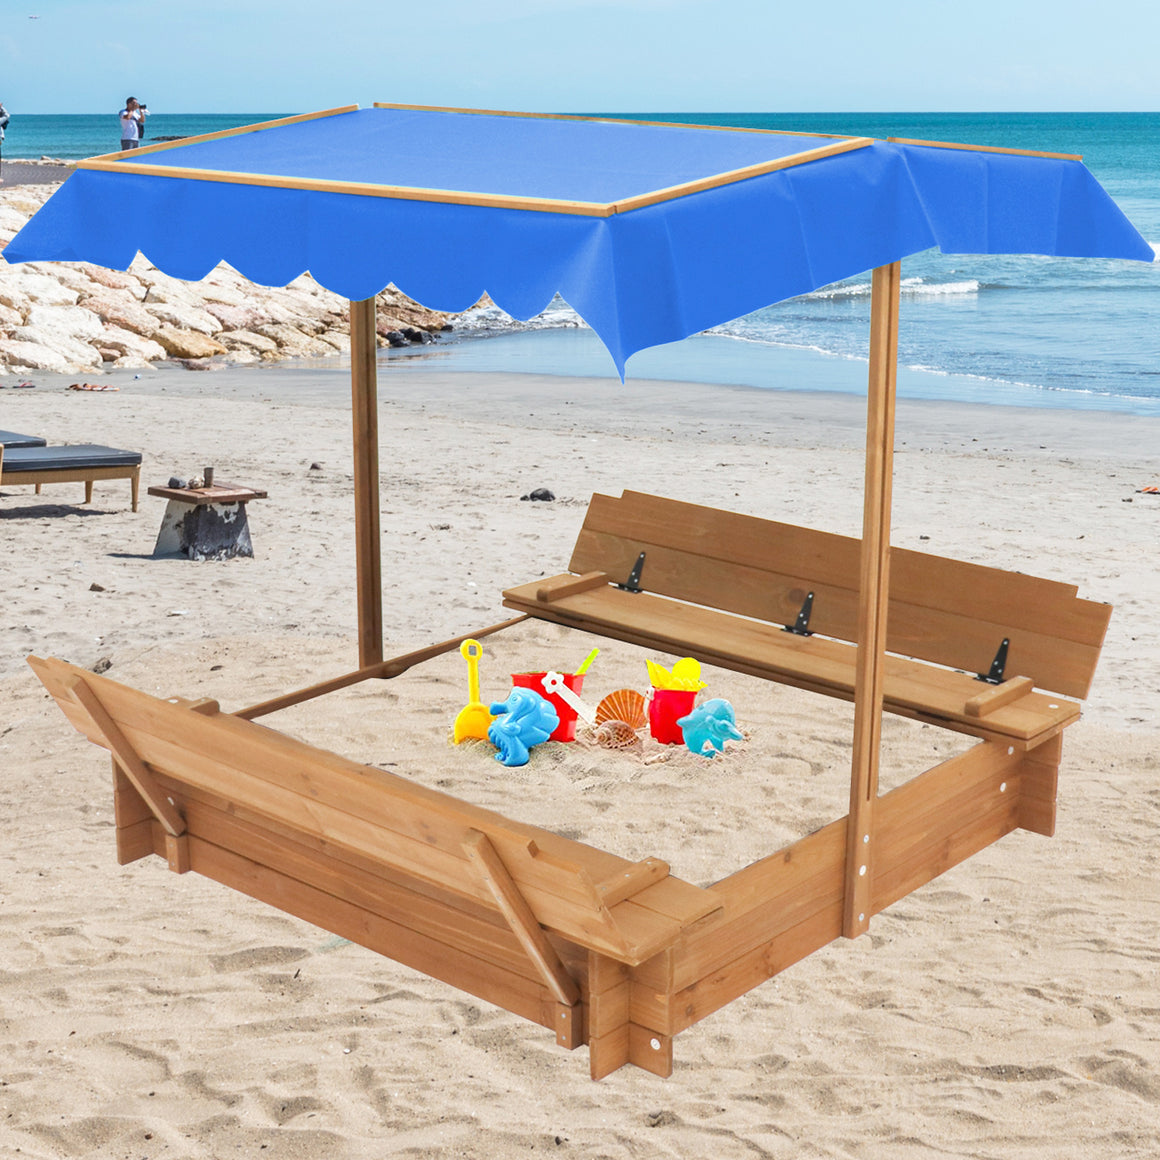 uhomepro Wooden Sandbox for Kids Toddler Play, Adjustable Height and UV-Resistant Canopy Shade, 3-10 Years Old Boys Girls Outdoor Toys